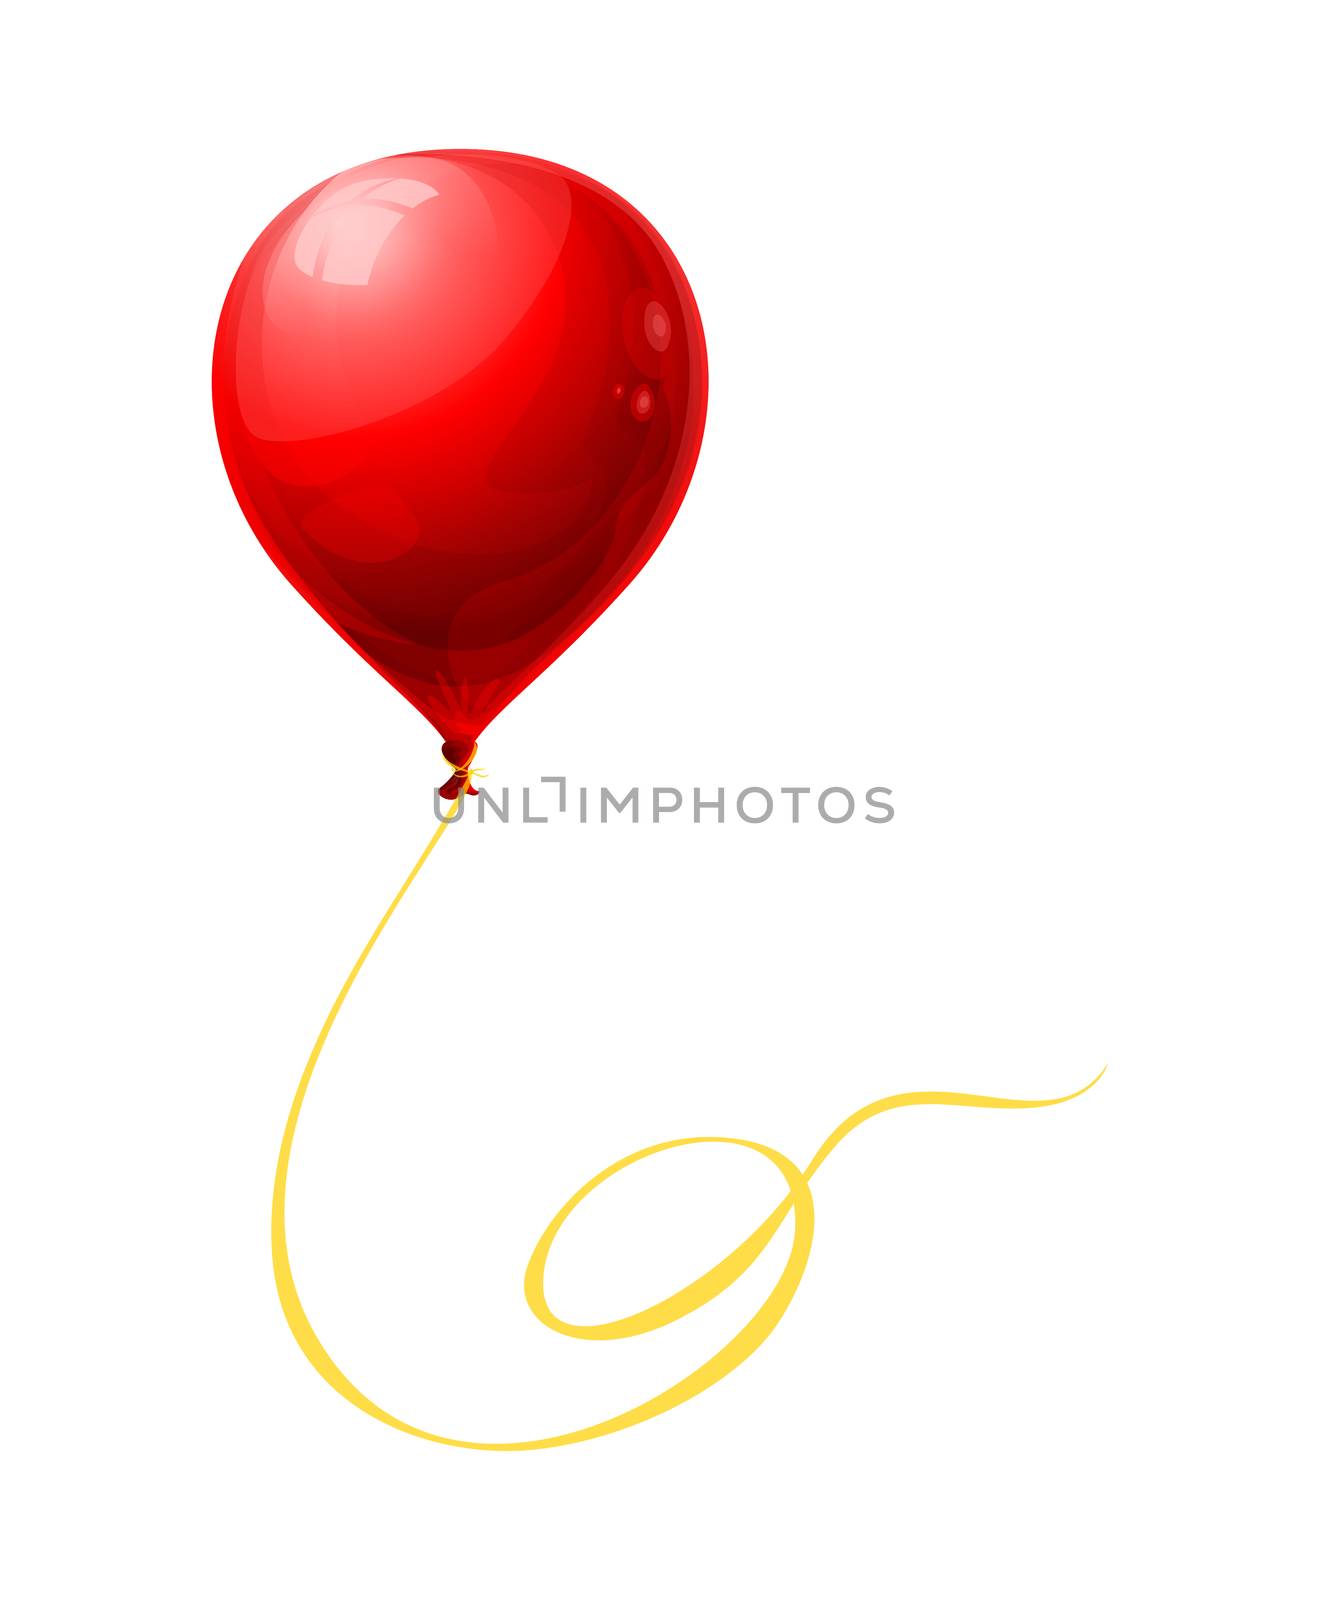 The most beautiful red balloon used for decorations and many festivities.